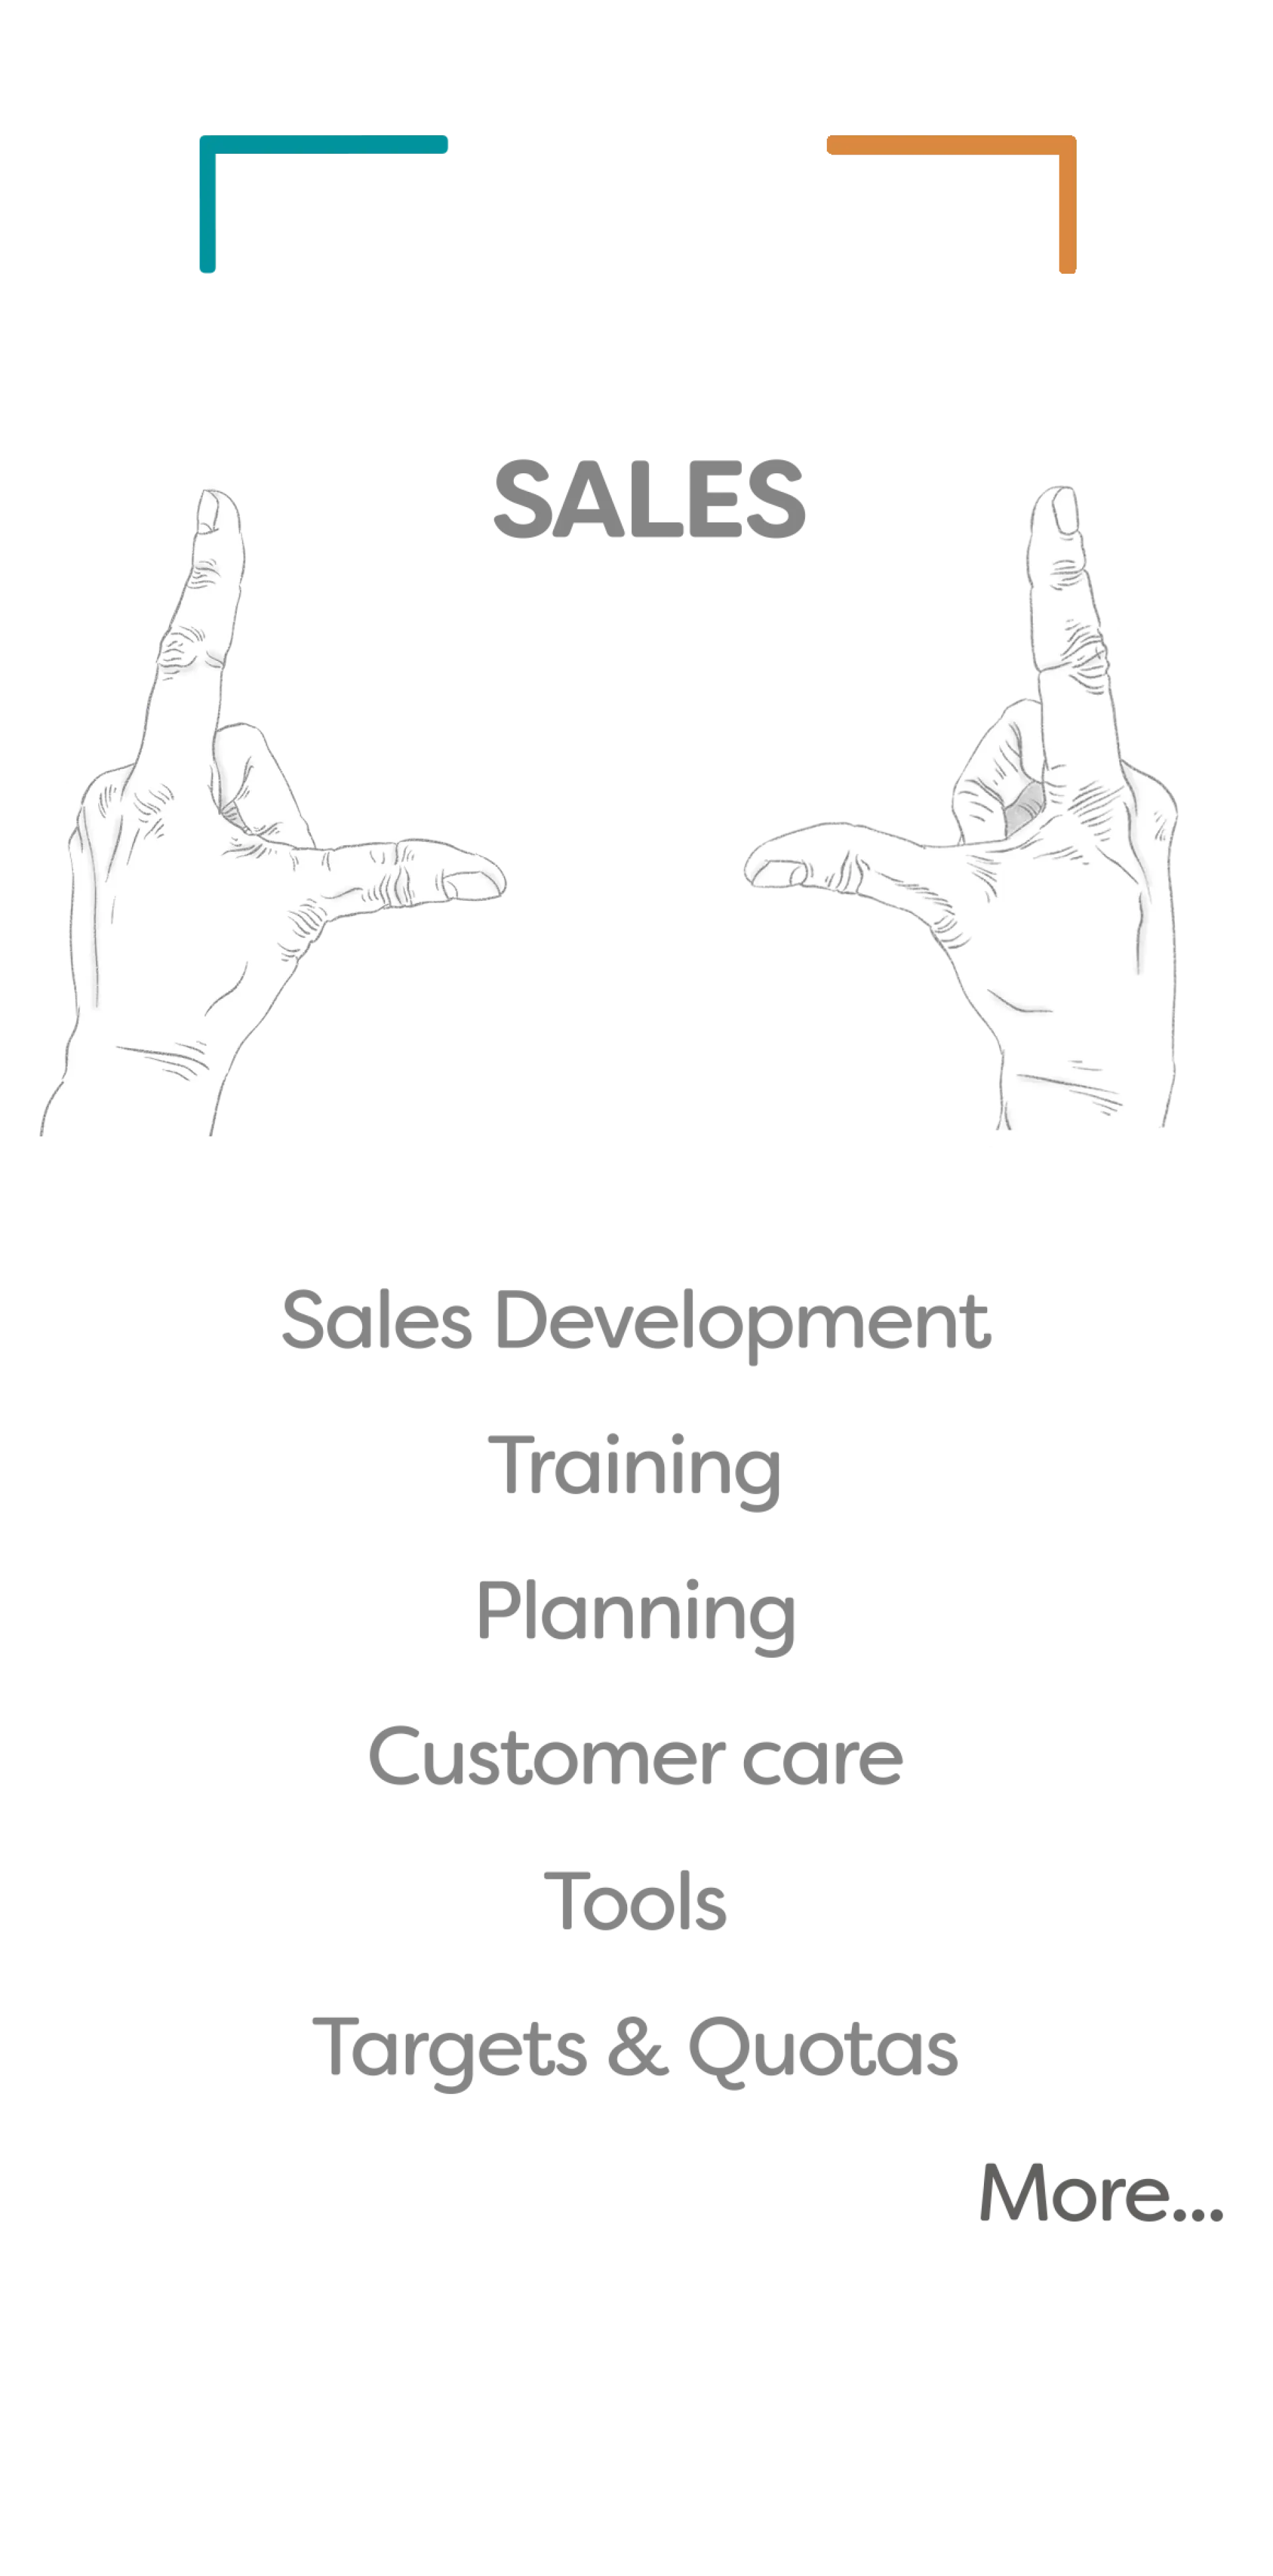 Sales services : Devopment, trainings, customer care. Project-based or As-a-service